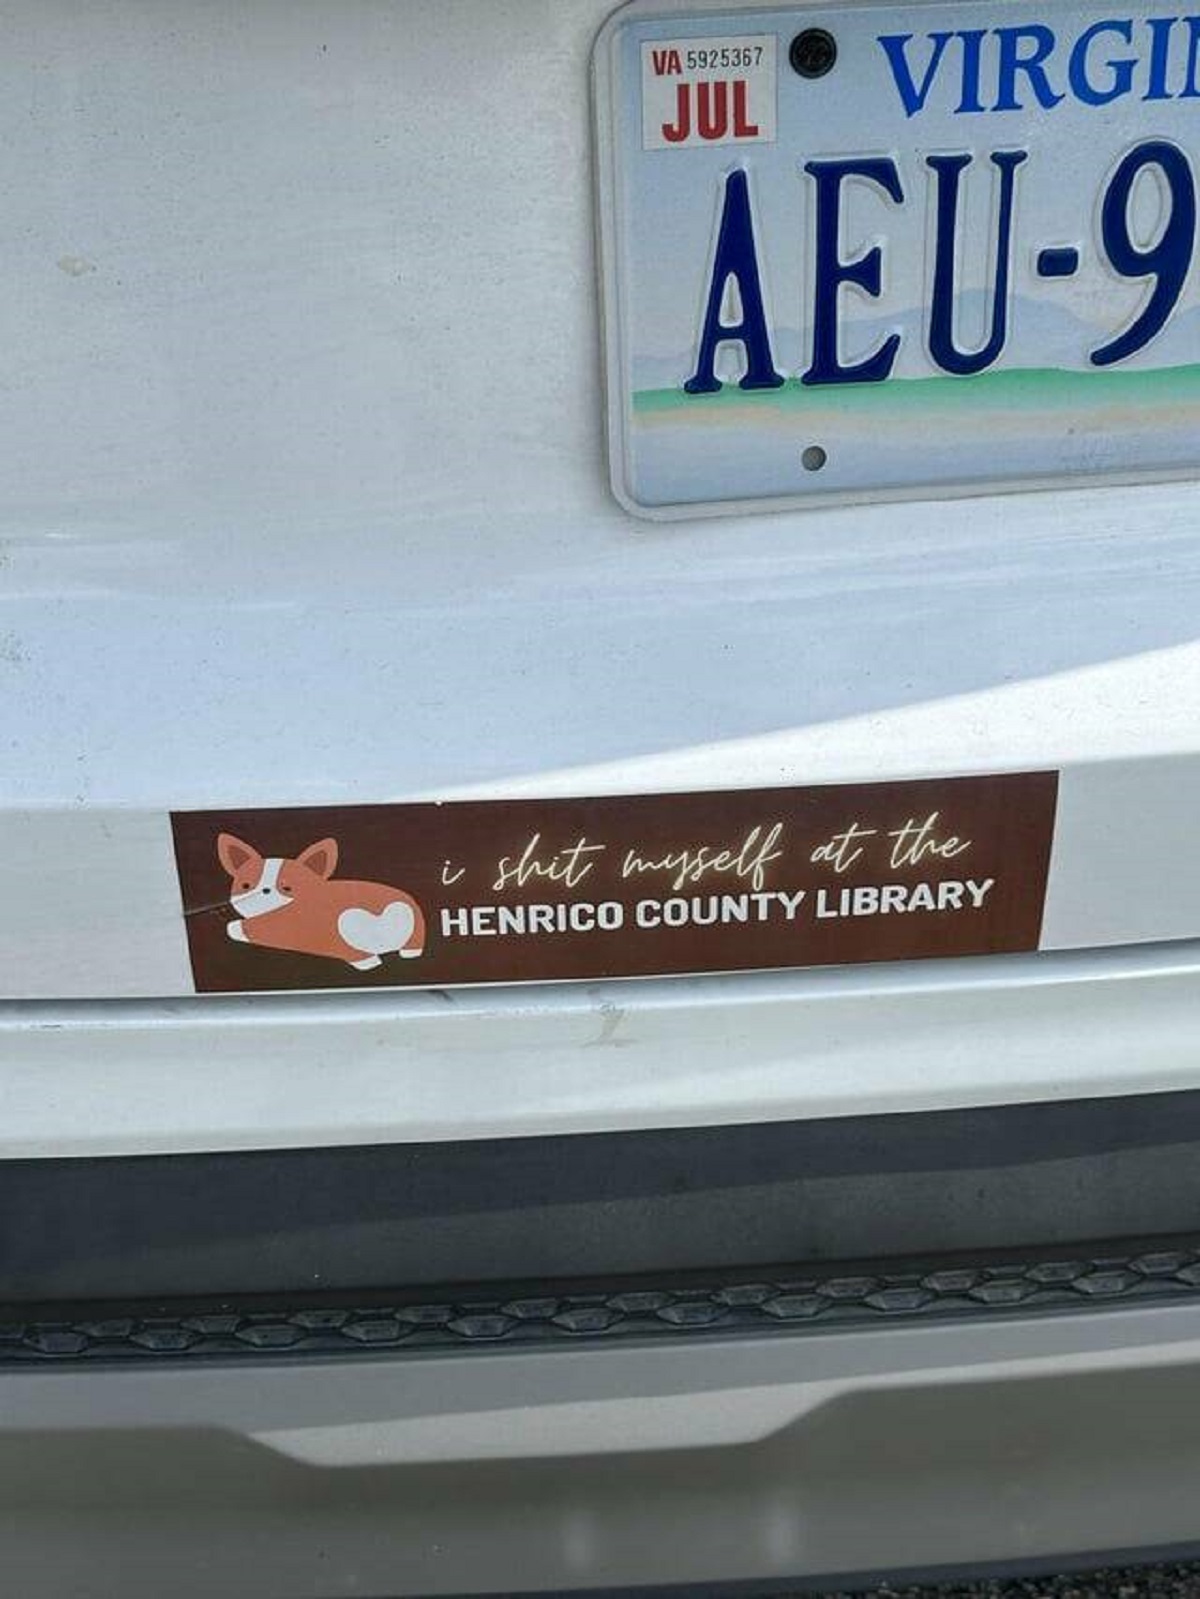 "This bumper sticker says the owner pooped their pants at a public library"